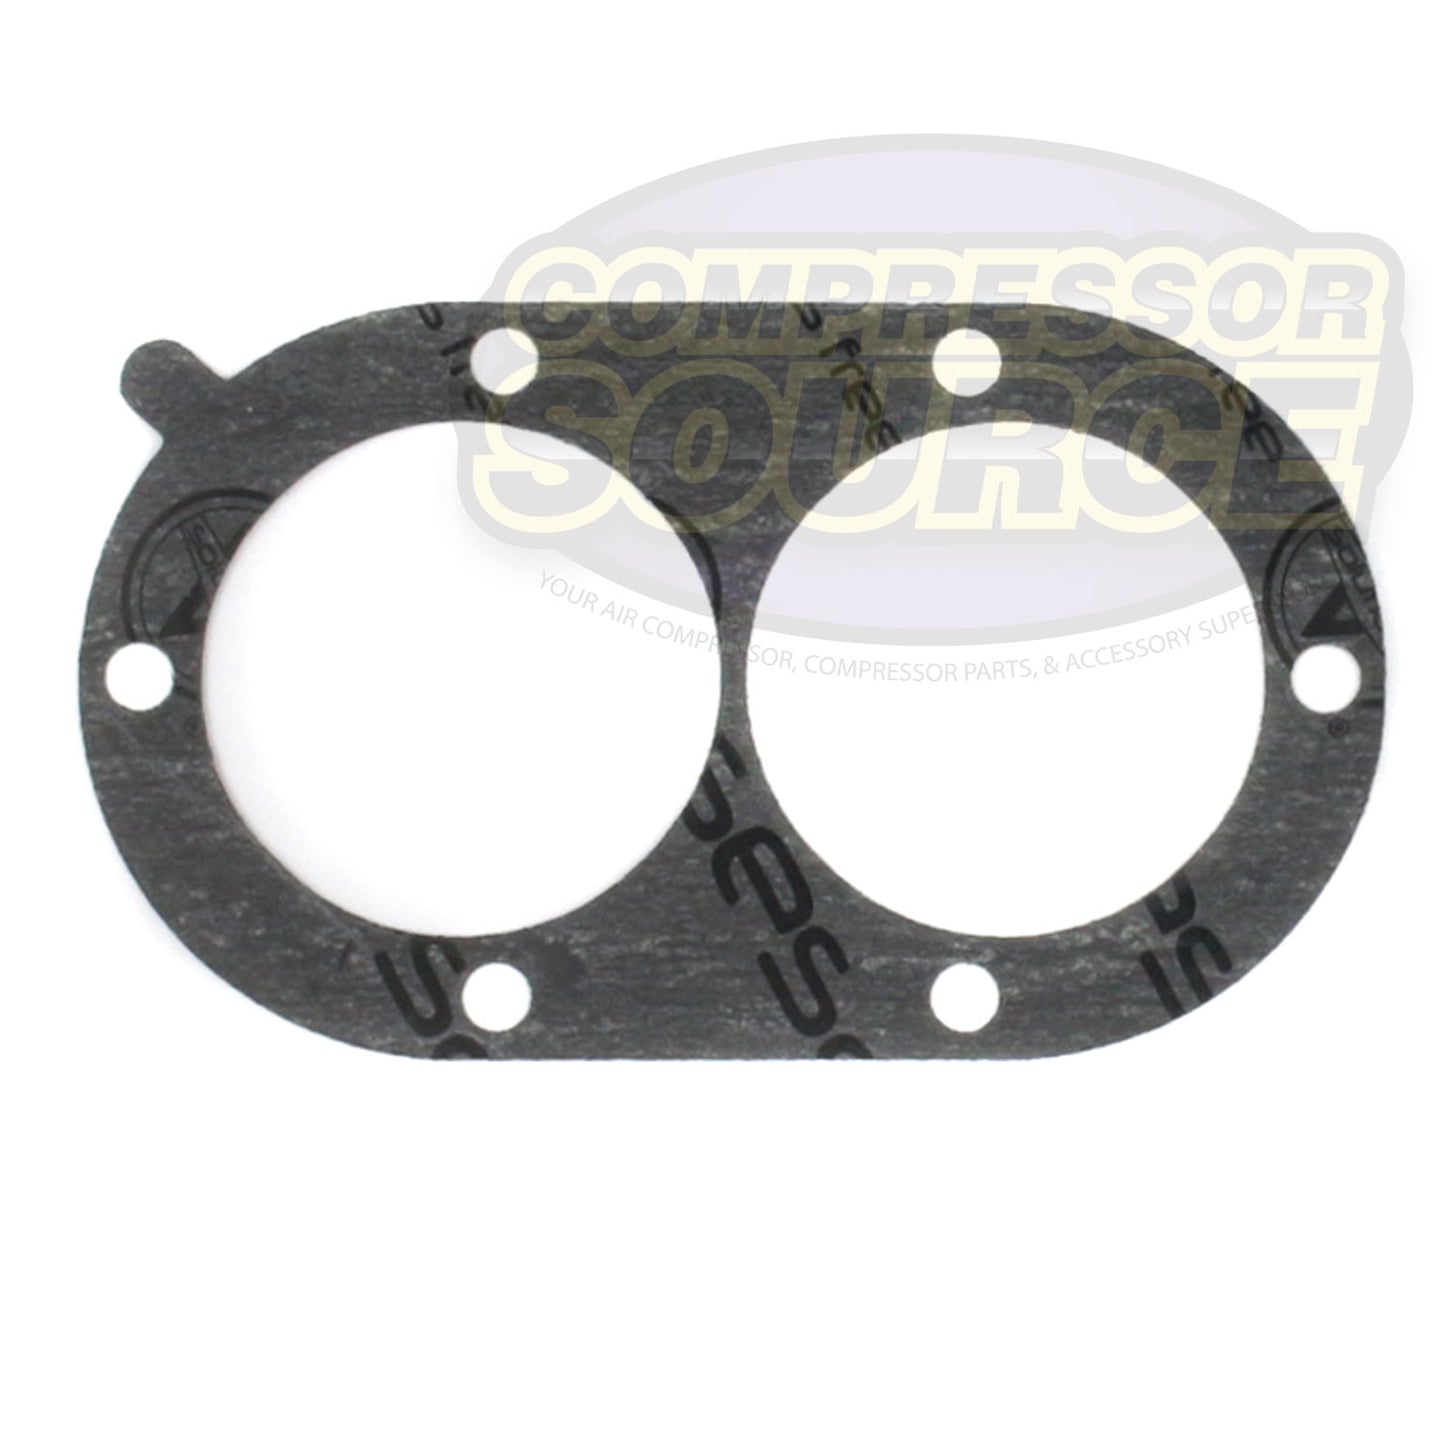 New Rolair Air Compressor  K17 Pump Head Gasket 30501110CH OEM Replacement